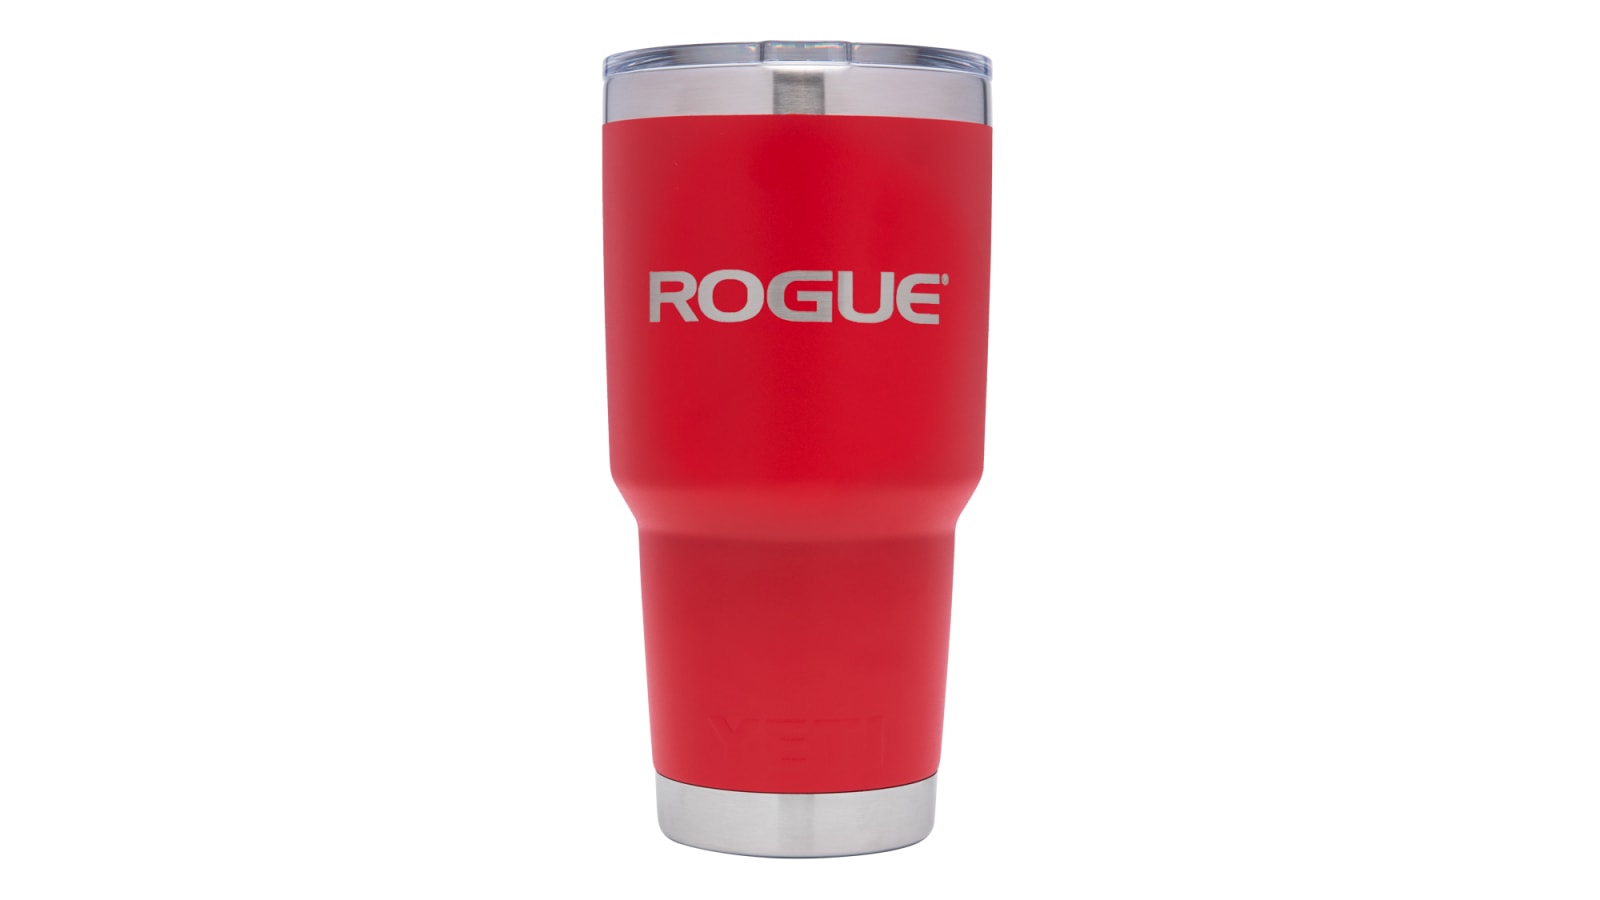 https://assets.roguefitness.com/f_auto,q_auto,c_limit,w_1600,b_rgb:ffffff/catalog/Gear%20and%20Accessories/Accessories/Shakers%20and%20Bottles/YT0100/YT0100-H_pb2aqi.png